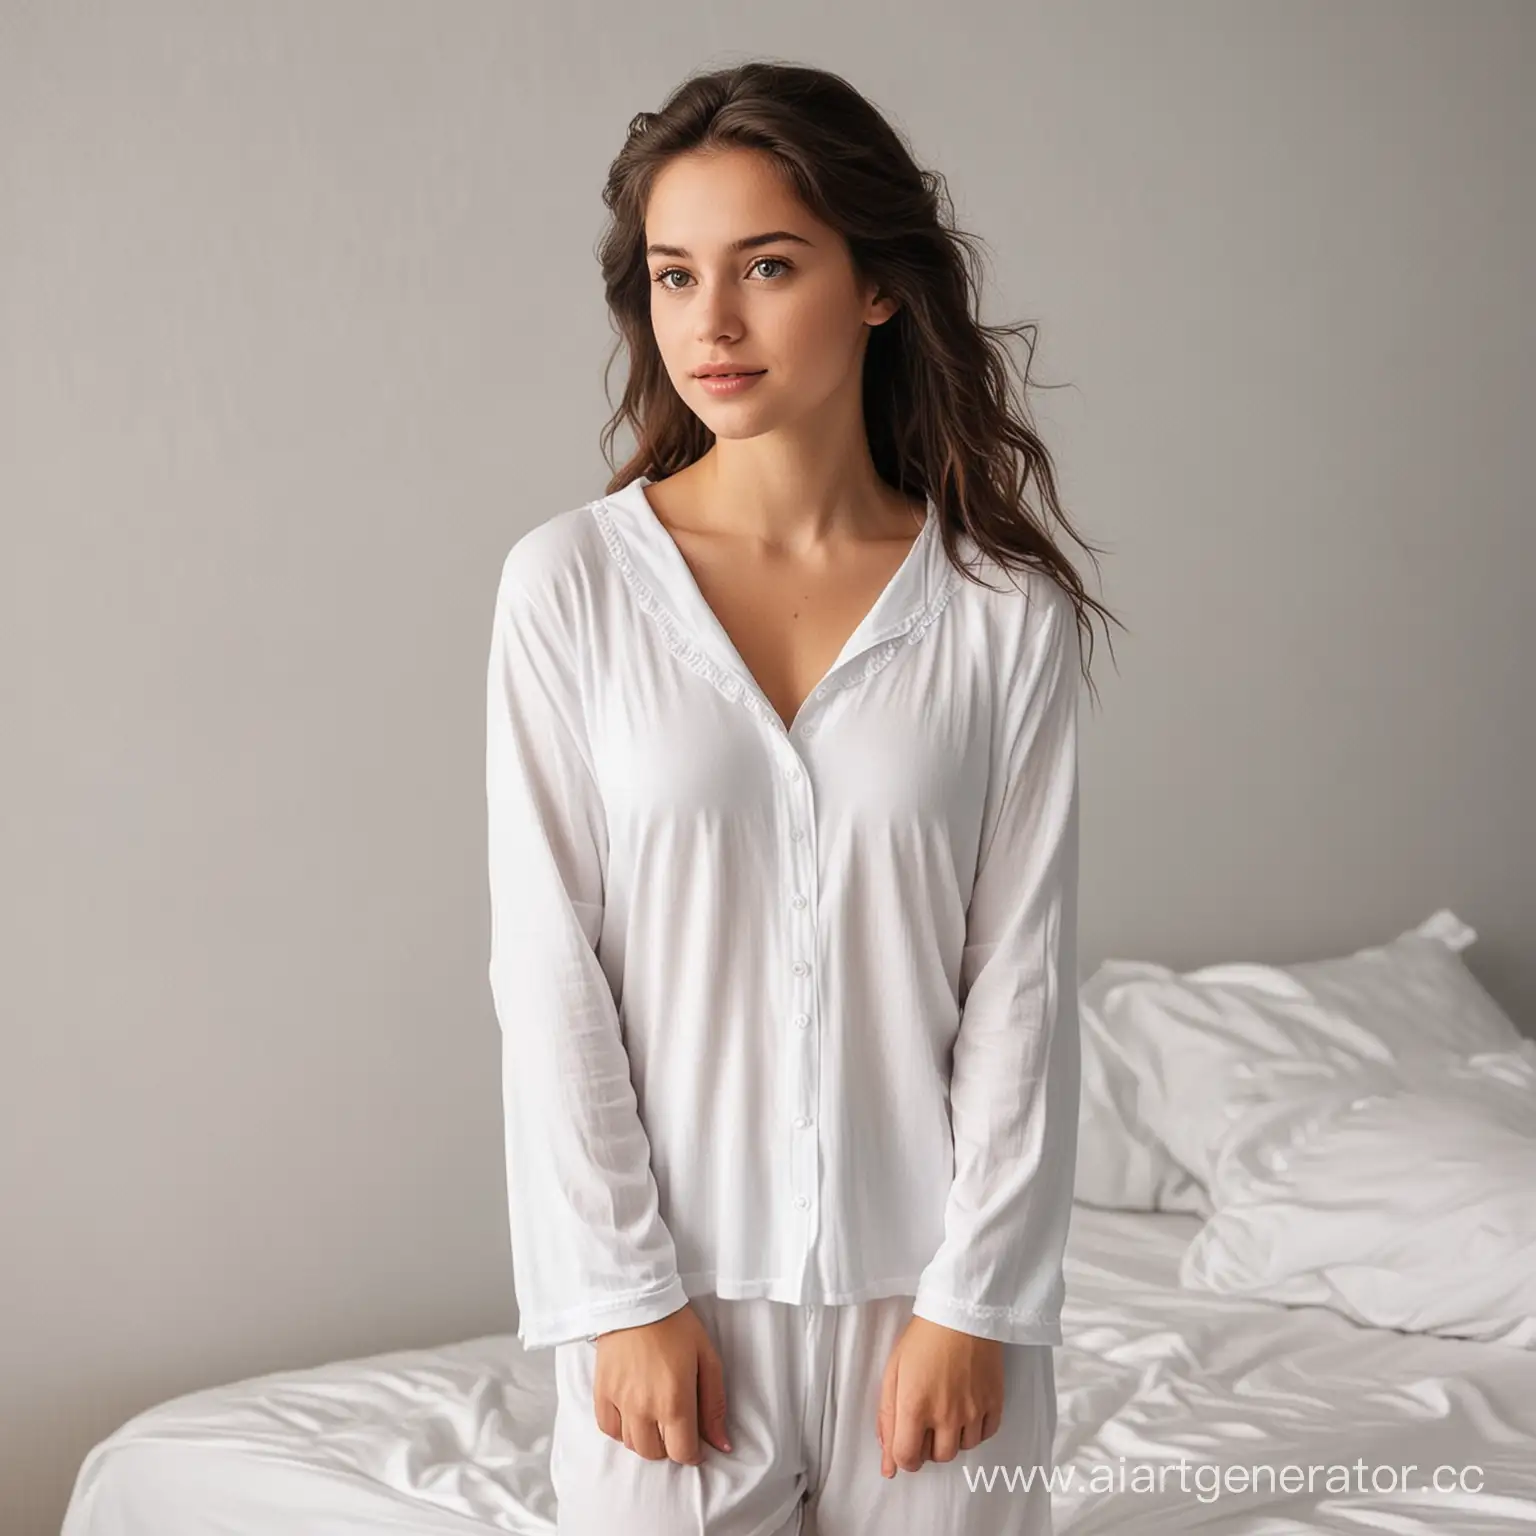 Dreamy-Girl-in-White-Pajamas-Relaxing-in-Bed